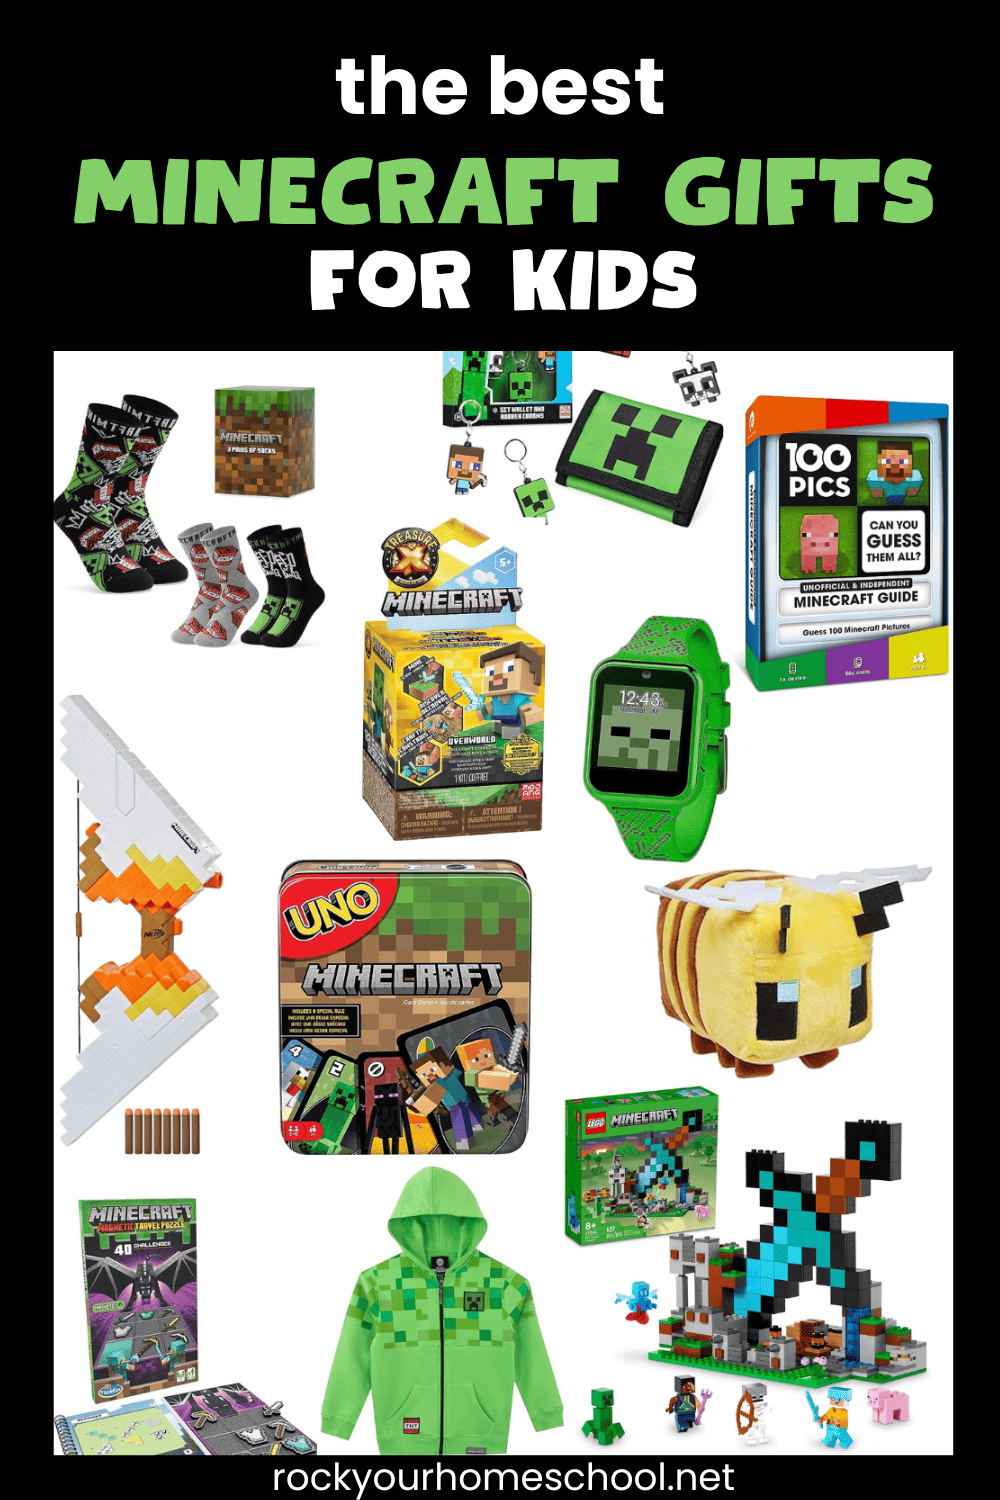 Variety of Minecraft gifts for kids.